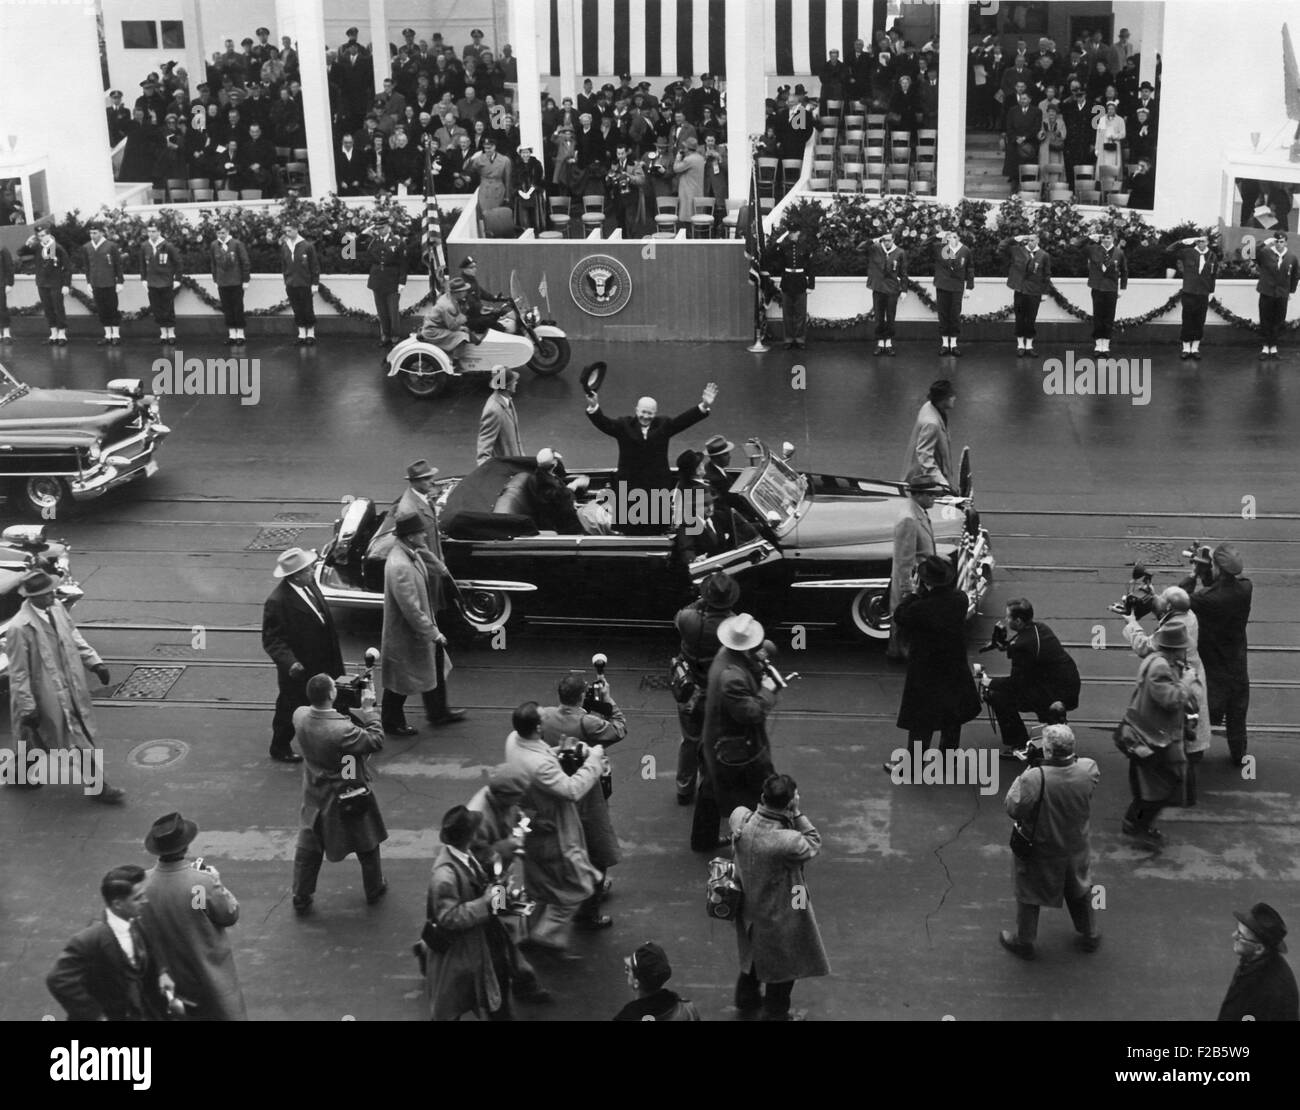 Eisenhower waves from an open car in the inaugural parade. Behind him is the White House Inaugural pavilion. Jan. 21, 1957. - (BSLOC 2014 16 36) Stock Photo